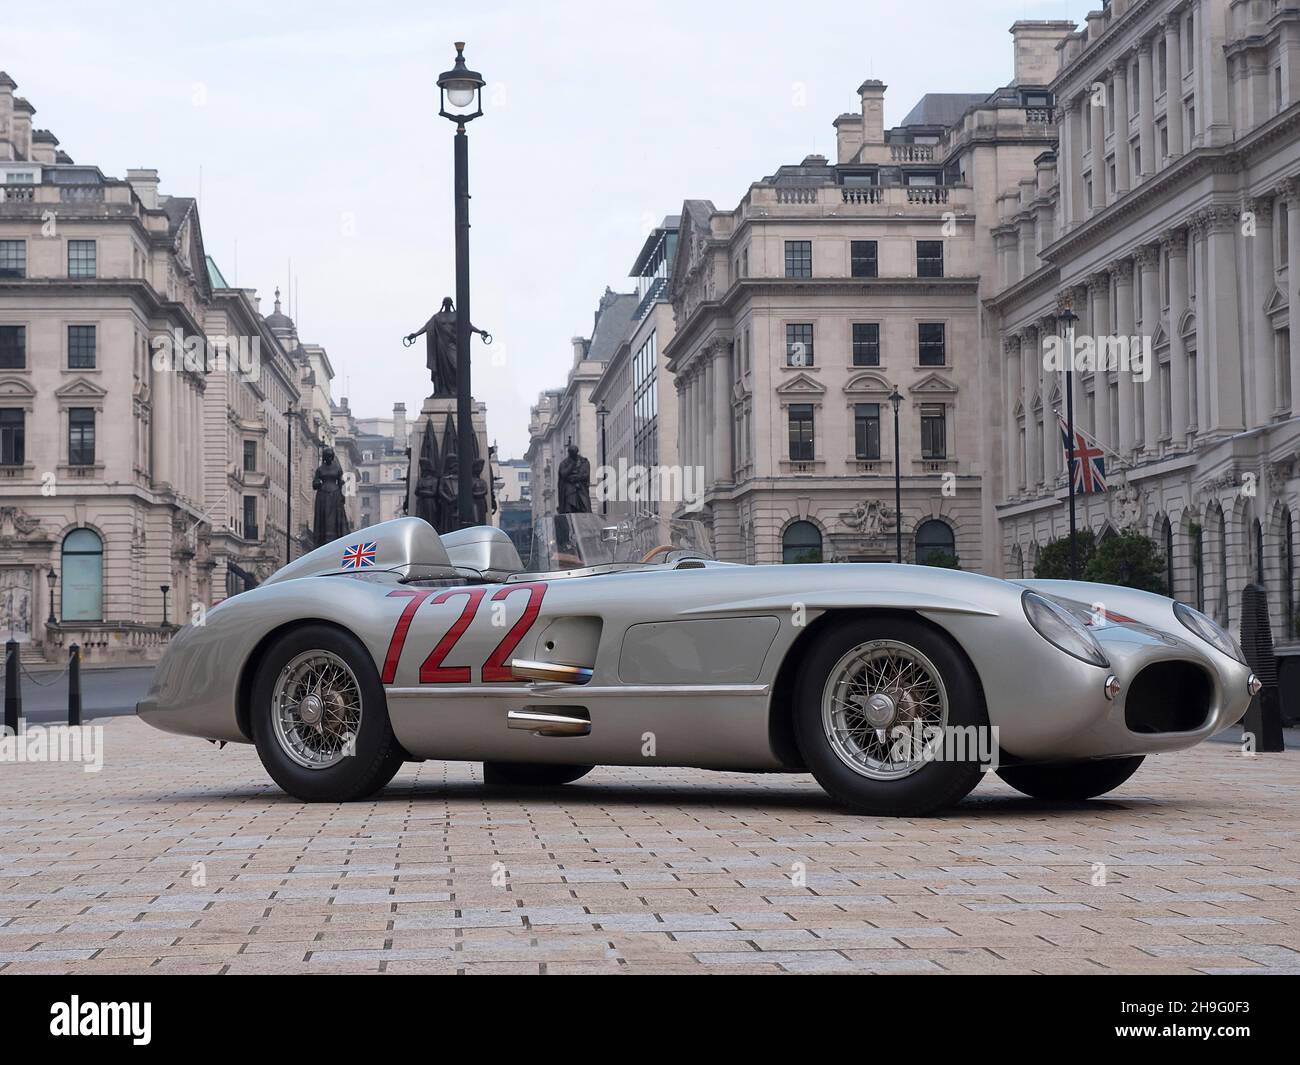 Stirling Moss 1955 Mercedes-Benz 300SLR Mille Miglia car on film location in central London 19/9/21 Stock Photo